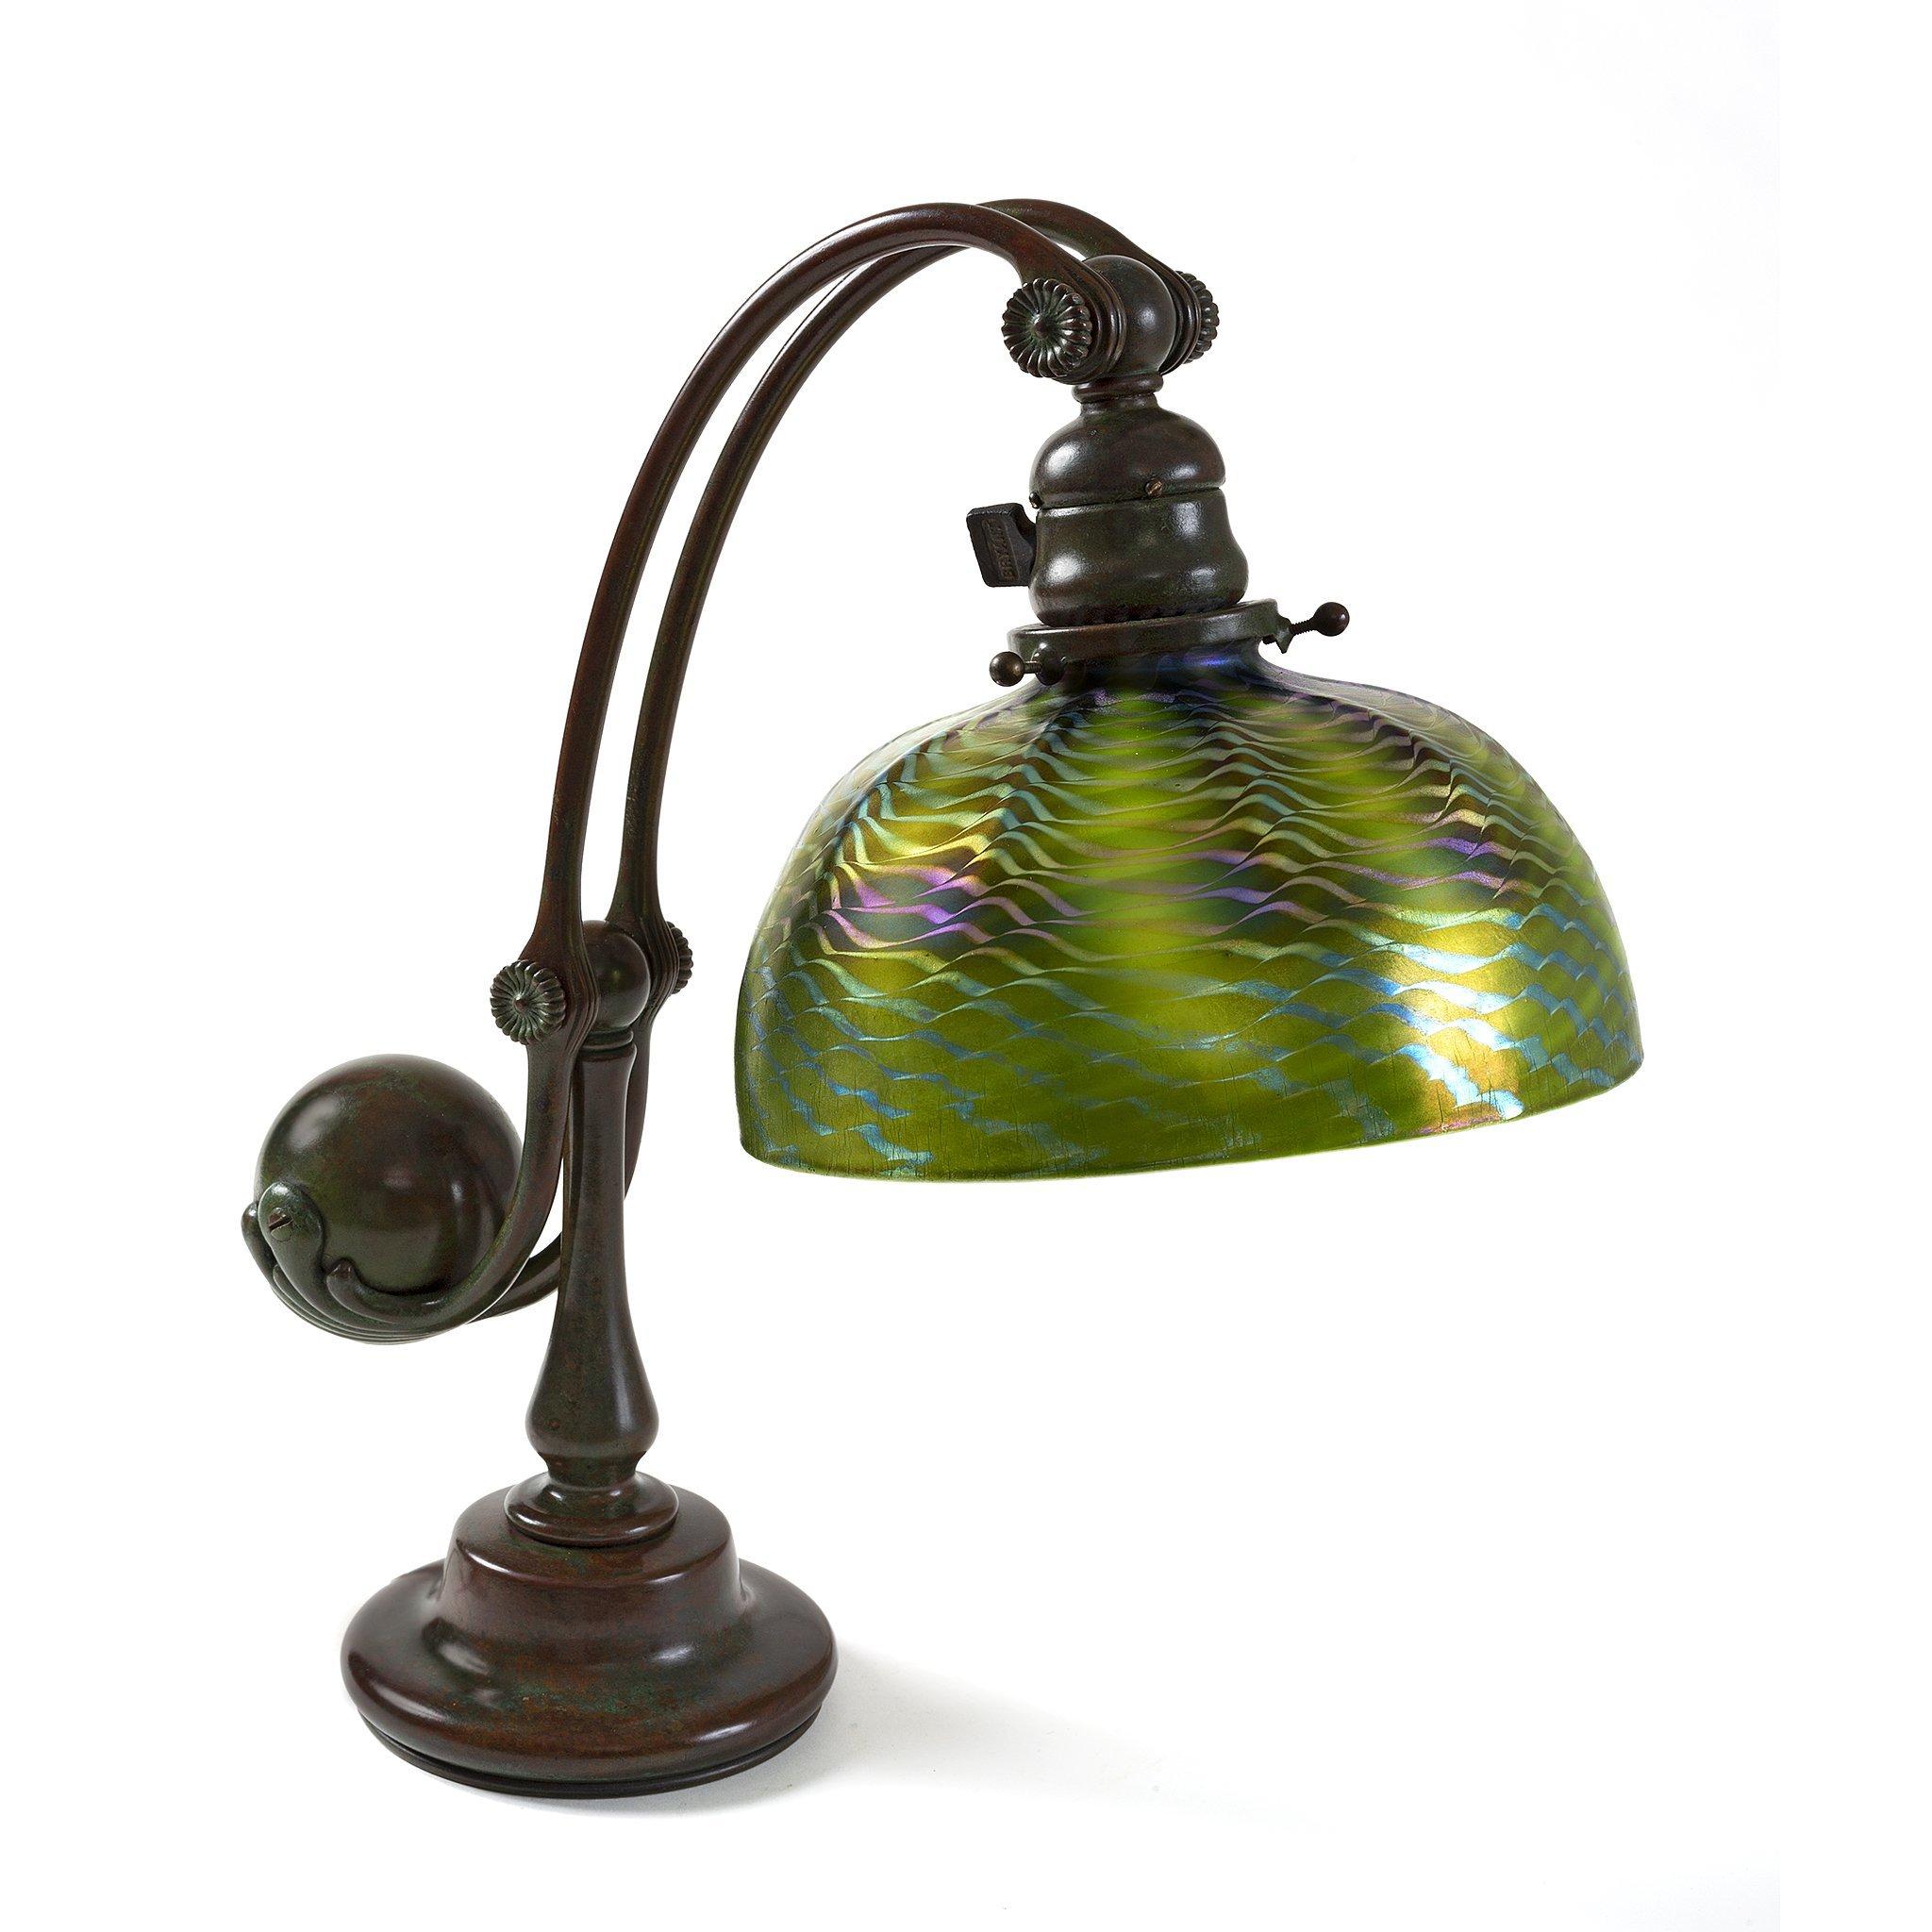 Aptly named, this Tiffany Studios New York “Counter-Balance” desk lamp is a study in elegance and equilibrium. A rotund bronze form of weighty proportions is cradled by two linear rods that support the orb from below before sweeping upward in a